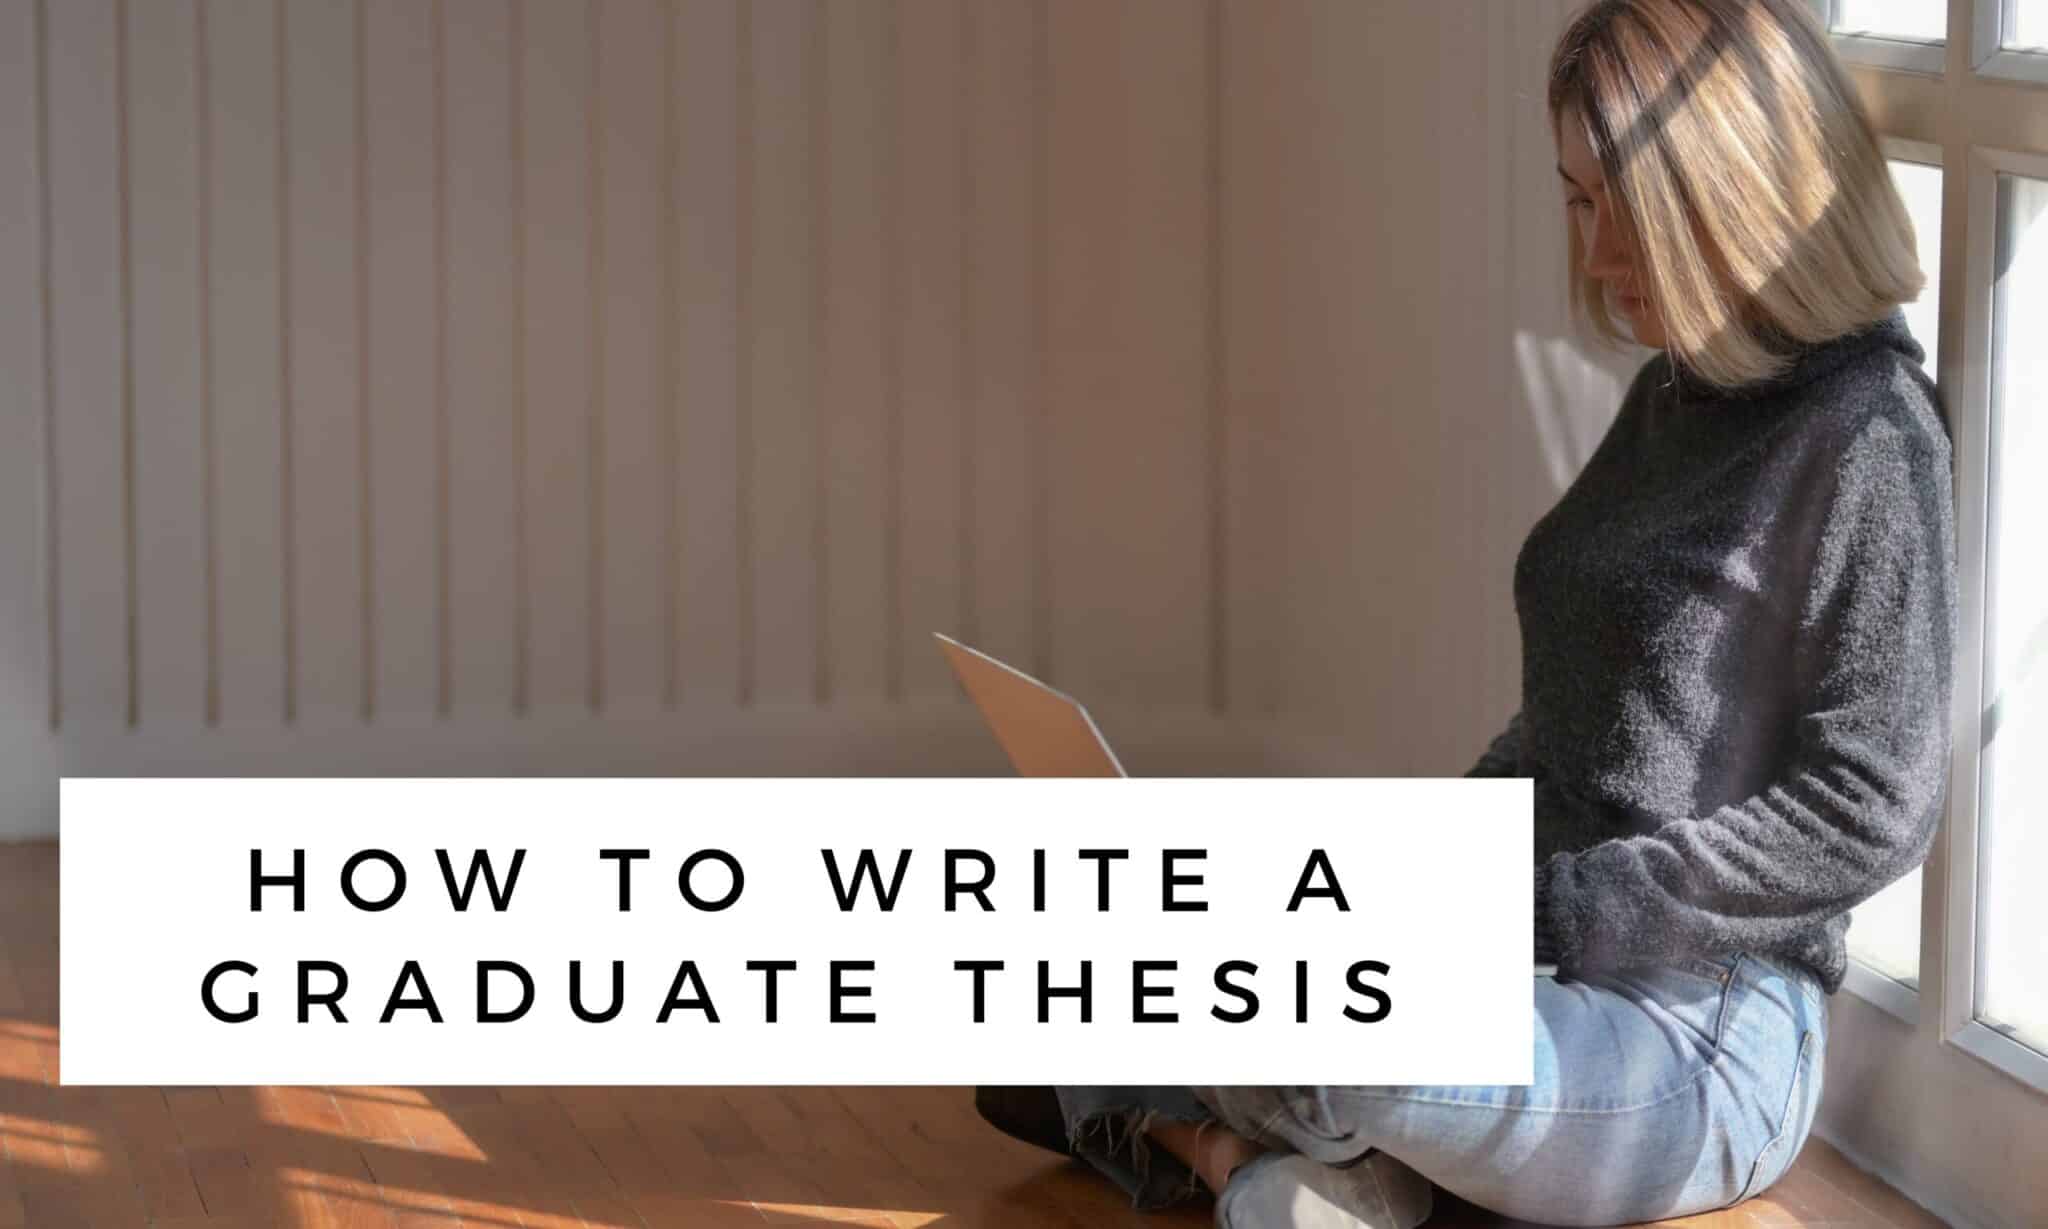 How to write a graduate thesis